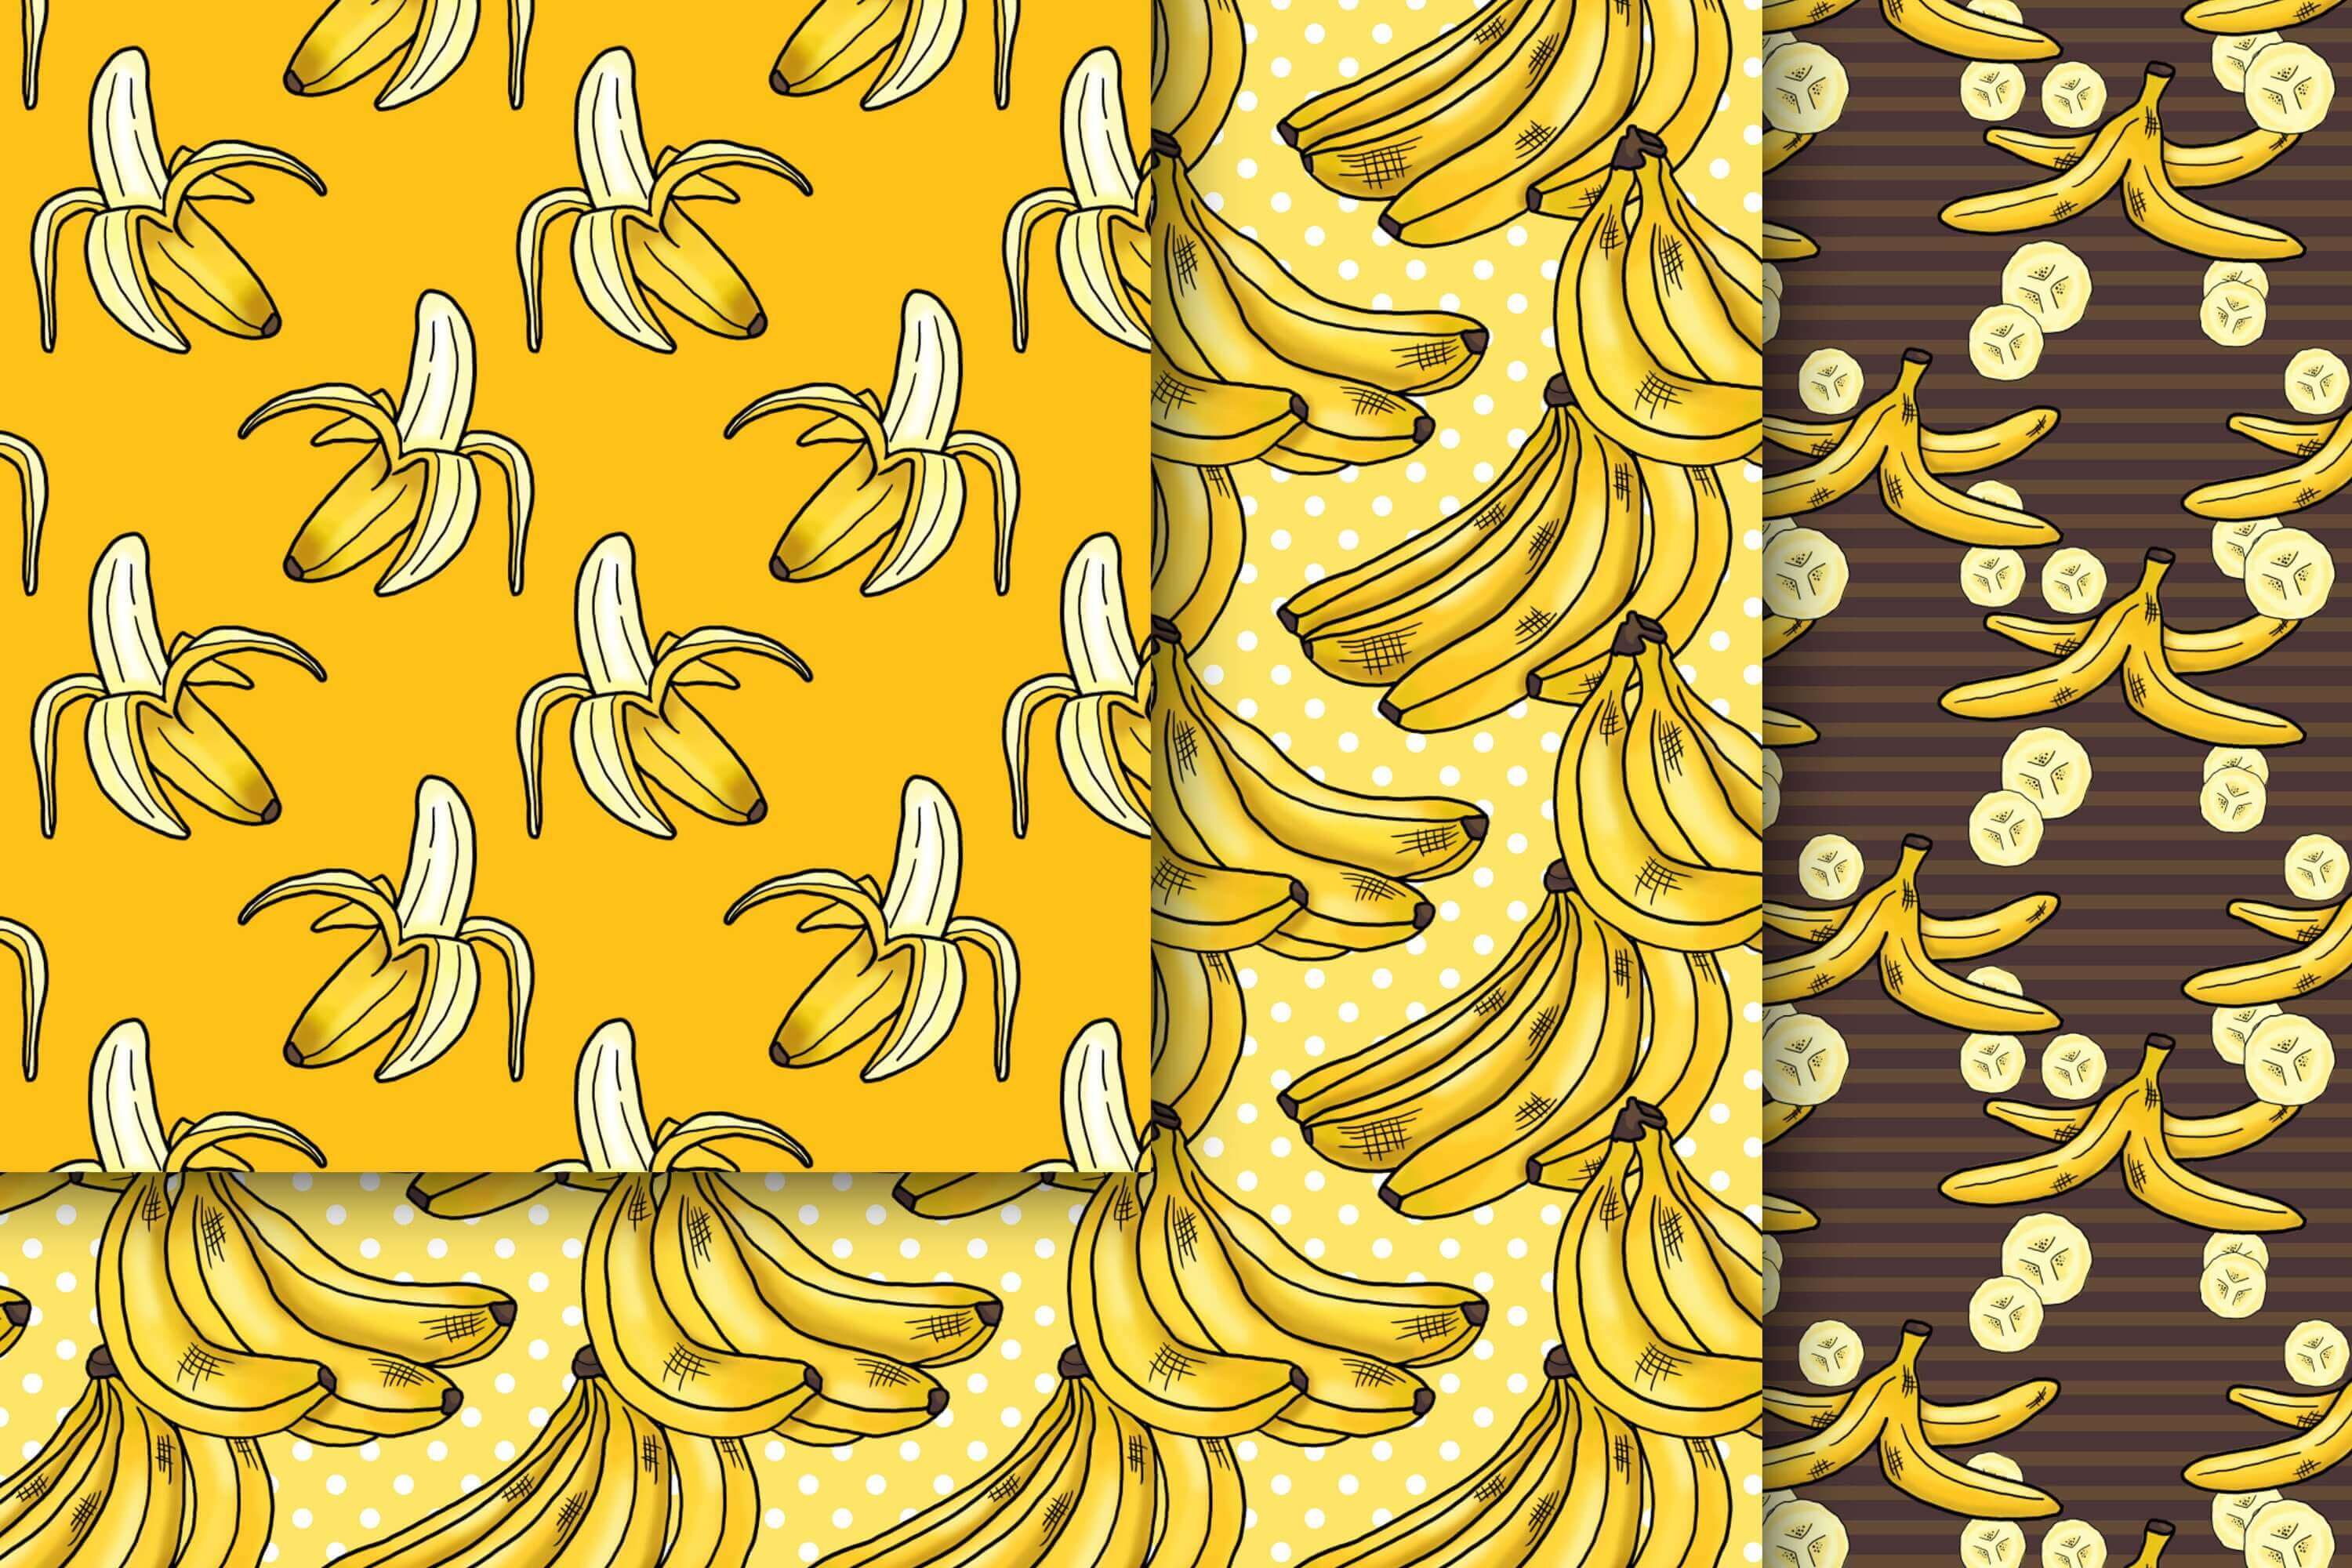 Patterns with the image of bananas in different compositions.